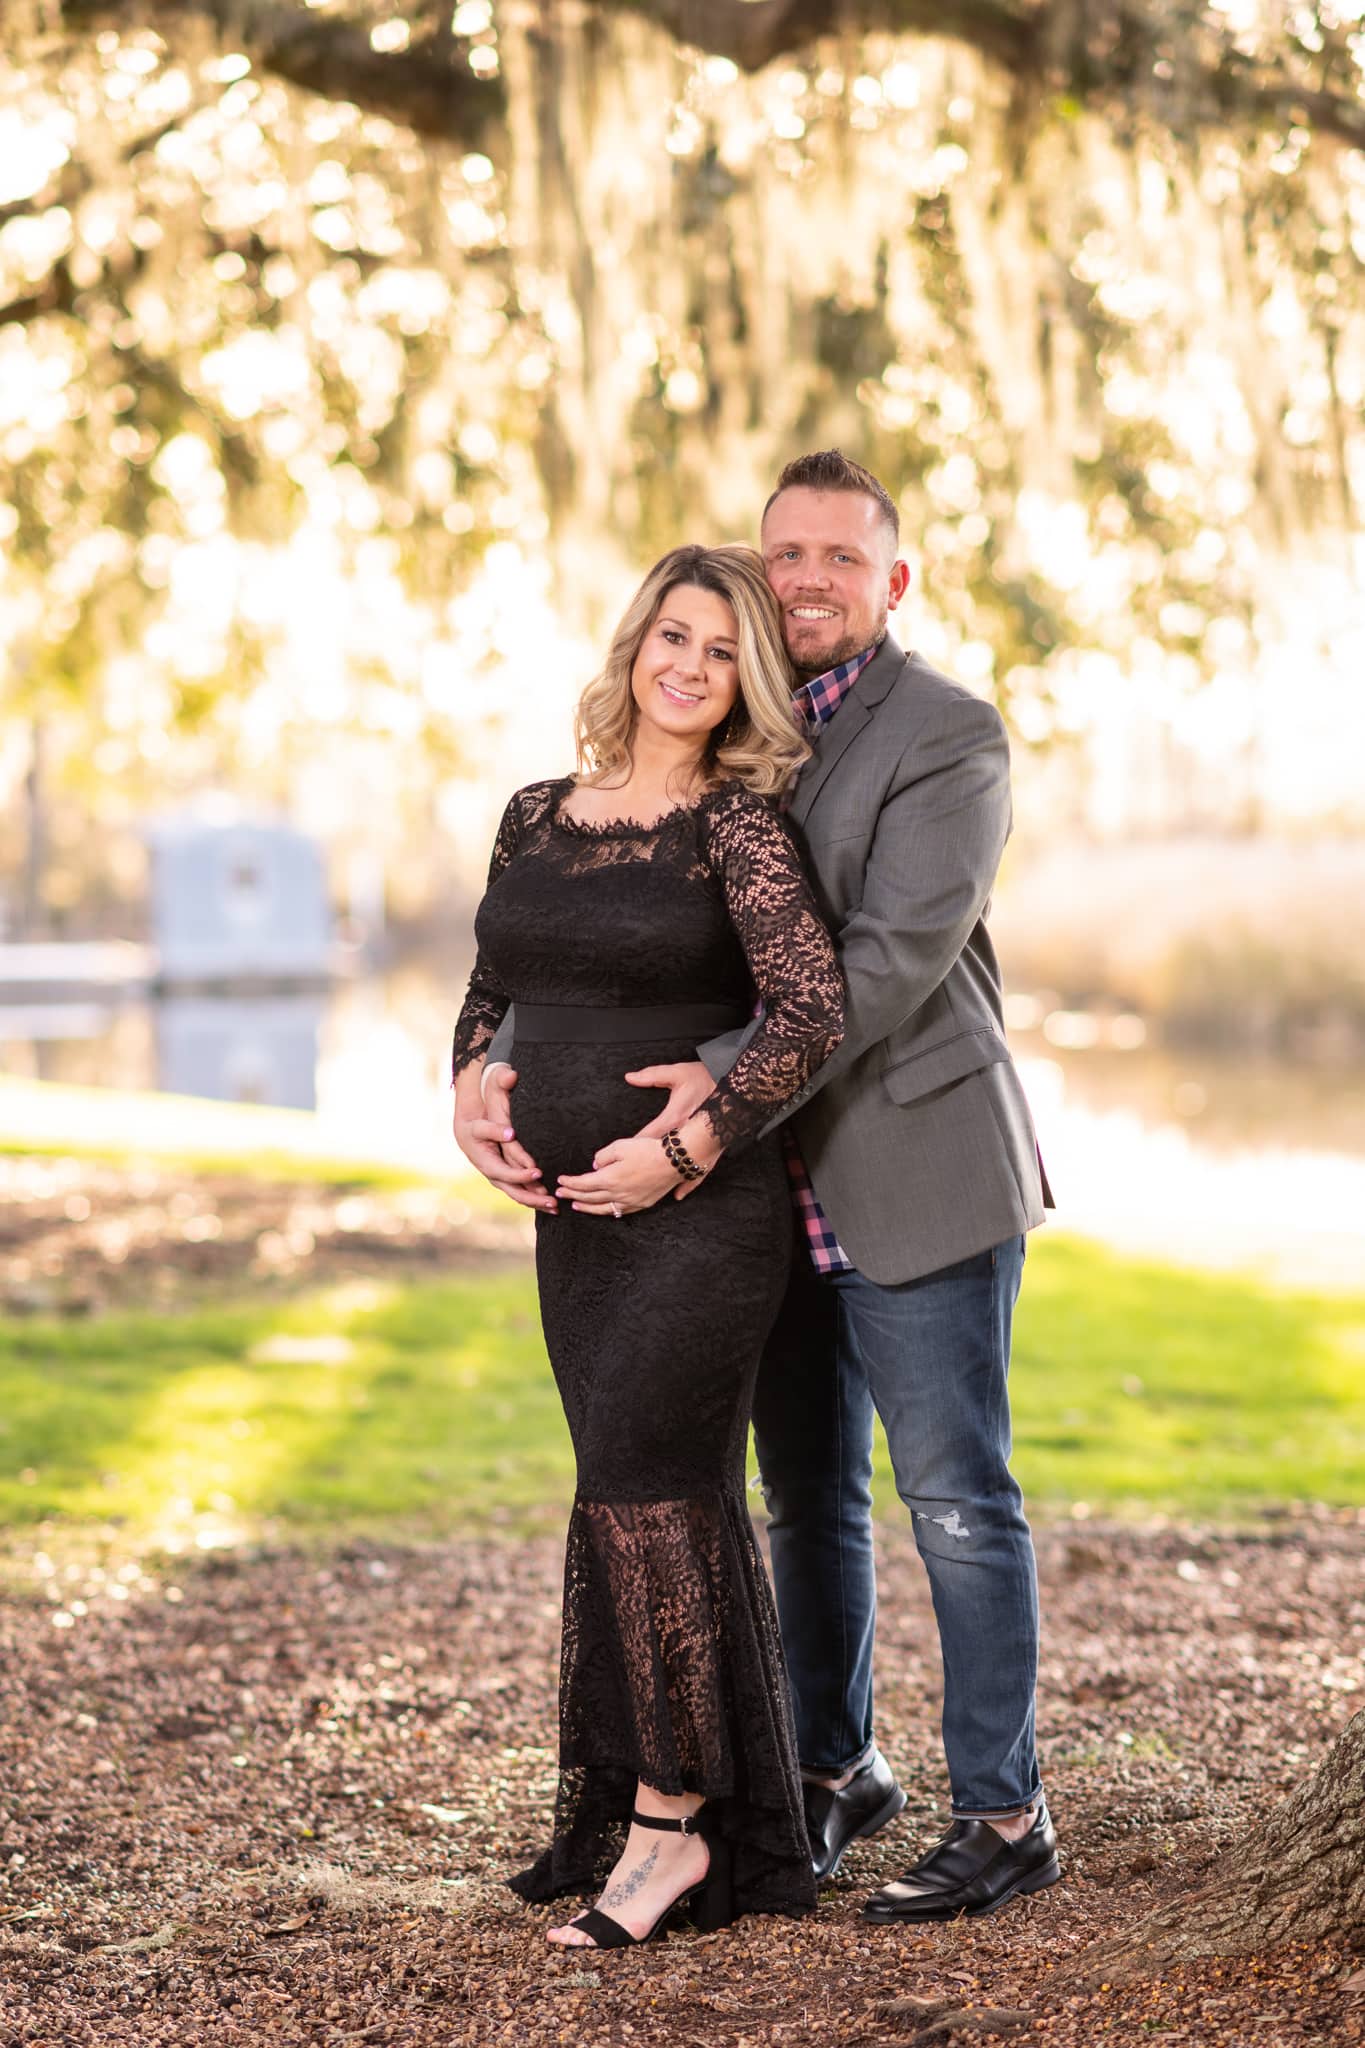 Maternity portrait with husband with arms around wife's belly  - Caledonia Golf & Fish Club